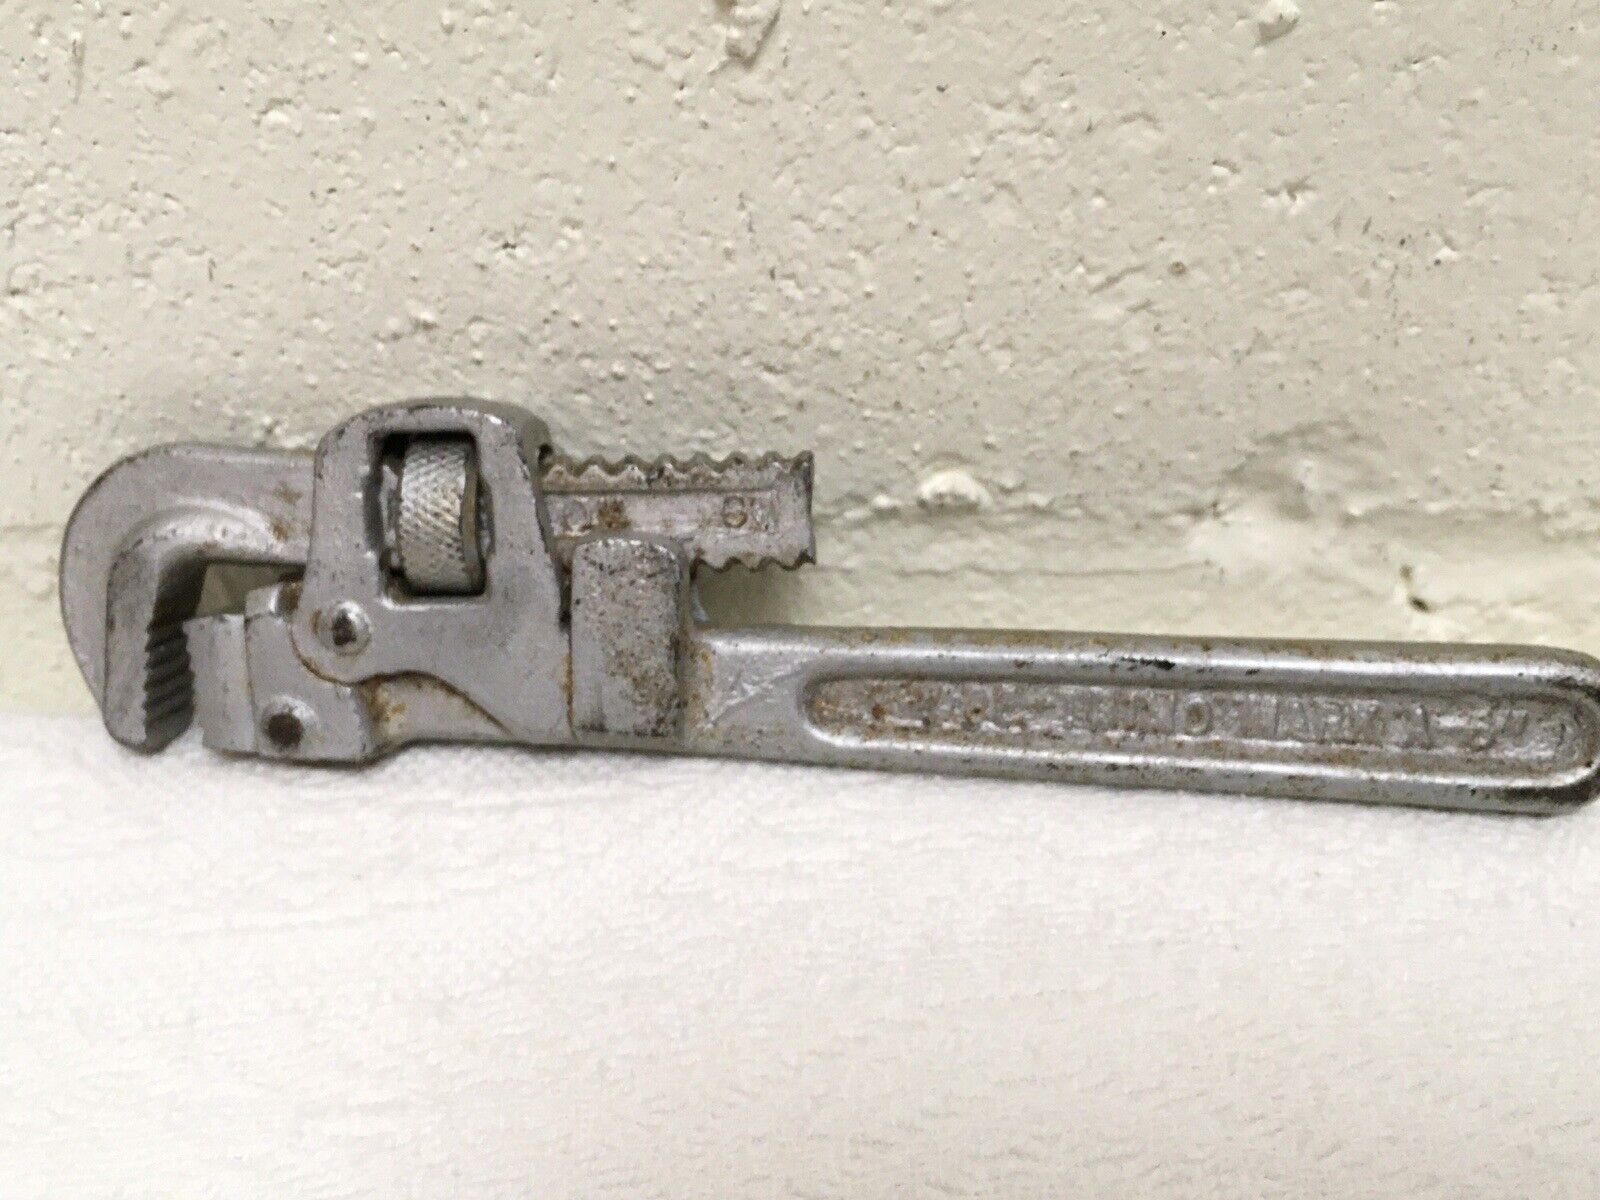 Vintage TRADE “TRIMO” MARK A-6” Pipe Wrench. PAT. JUNE 18, 1889. U.S.A.